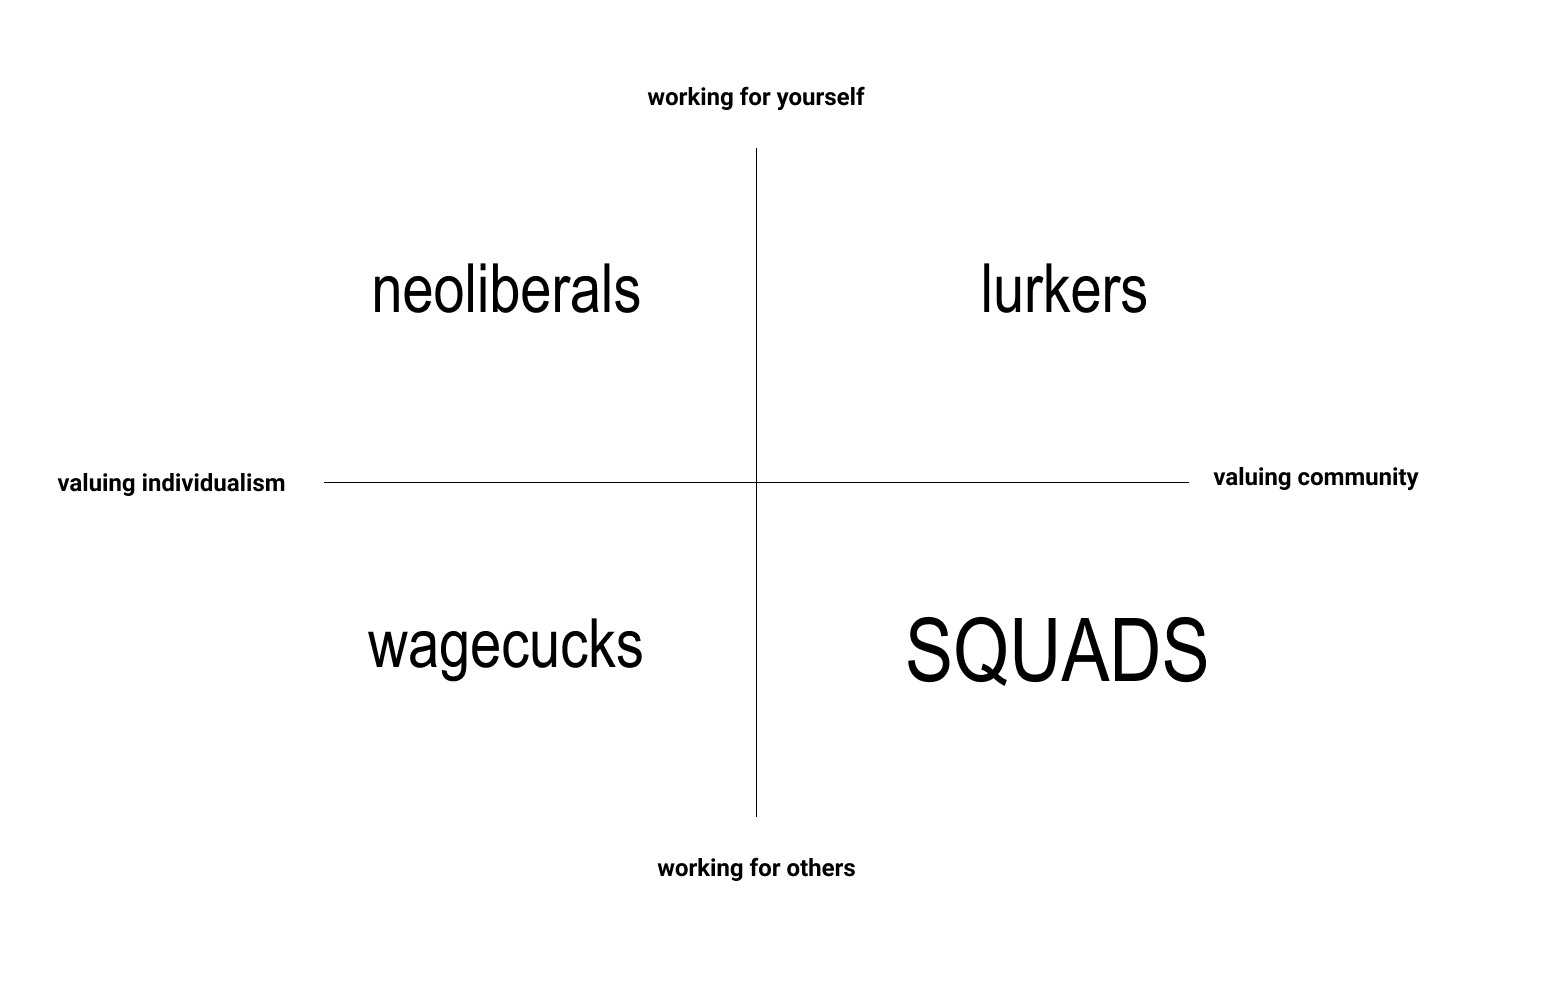 Squad collectivism is a better form of autonomy than neoliberal individualism